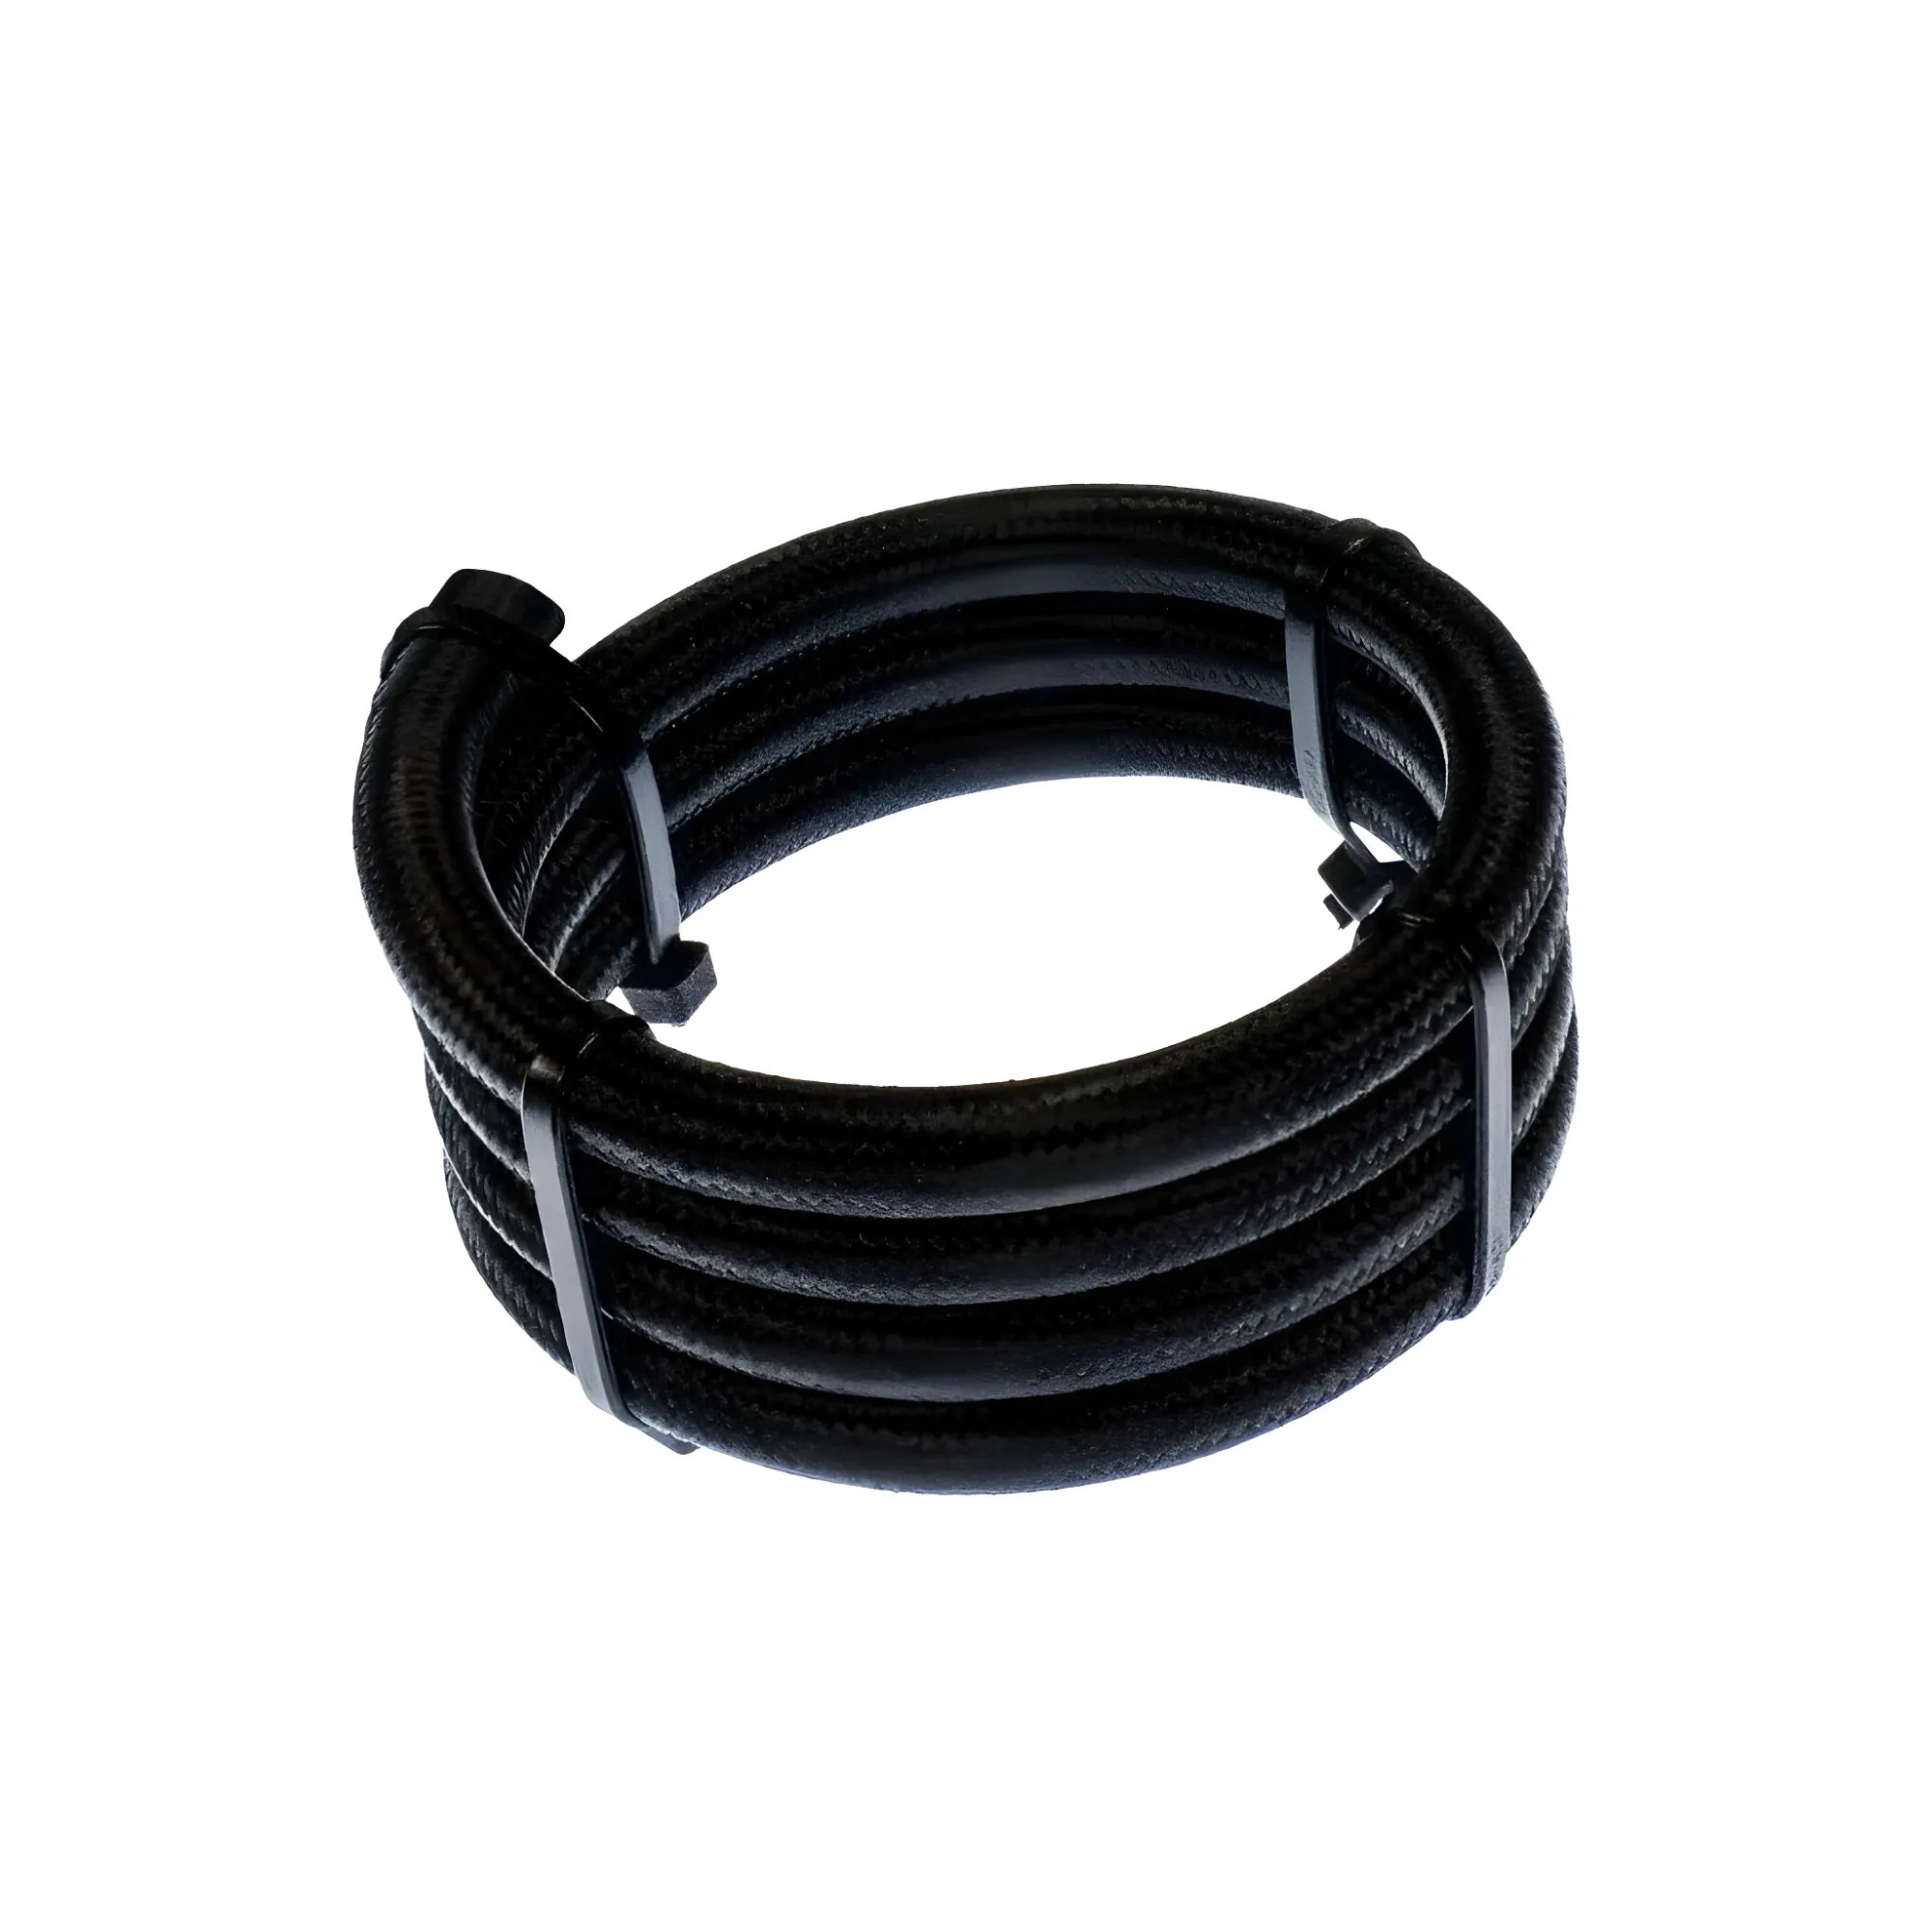 6AN PTFE Black Stainless Steel Hose / Line (E85 + Race Fuel Safe) – BY THE  FOOT